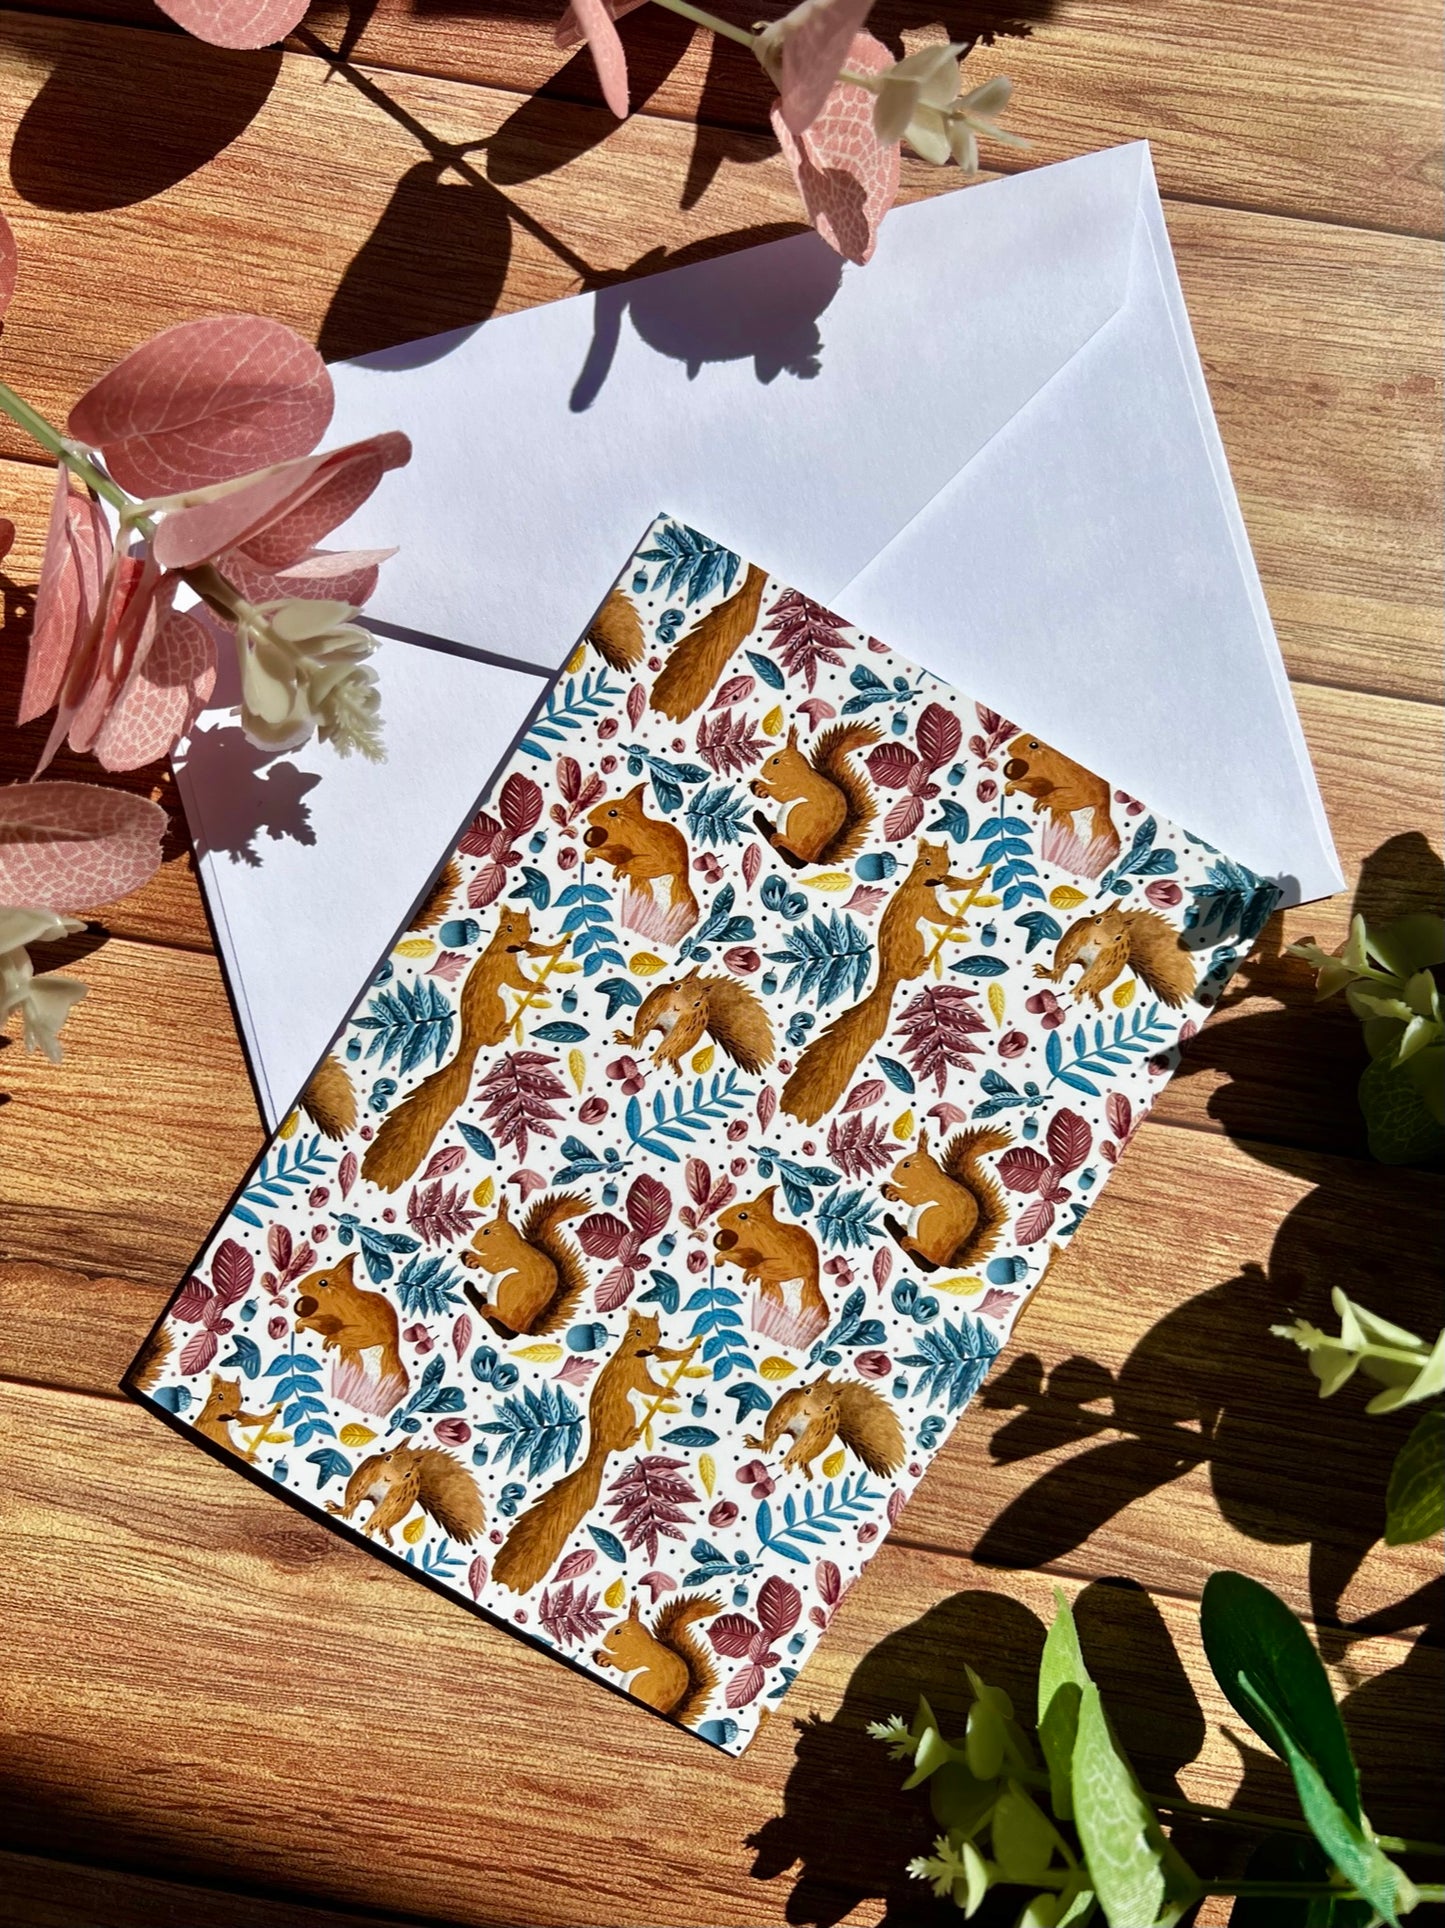 A small greetings card featuring a red squirrel surface pattern design lying on top of an envelope. Both are lying on a wooden surface with pink and green foliage around the card.